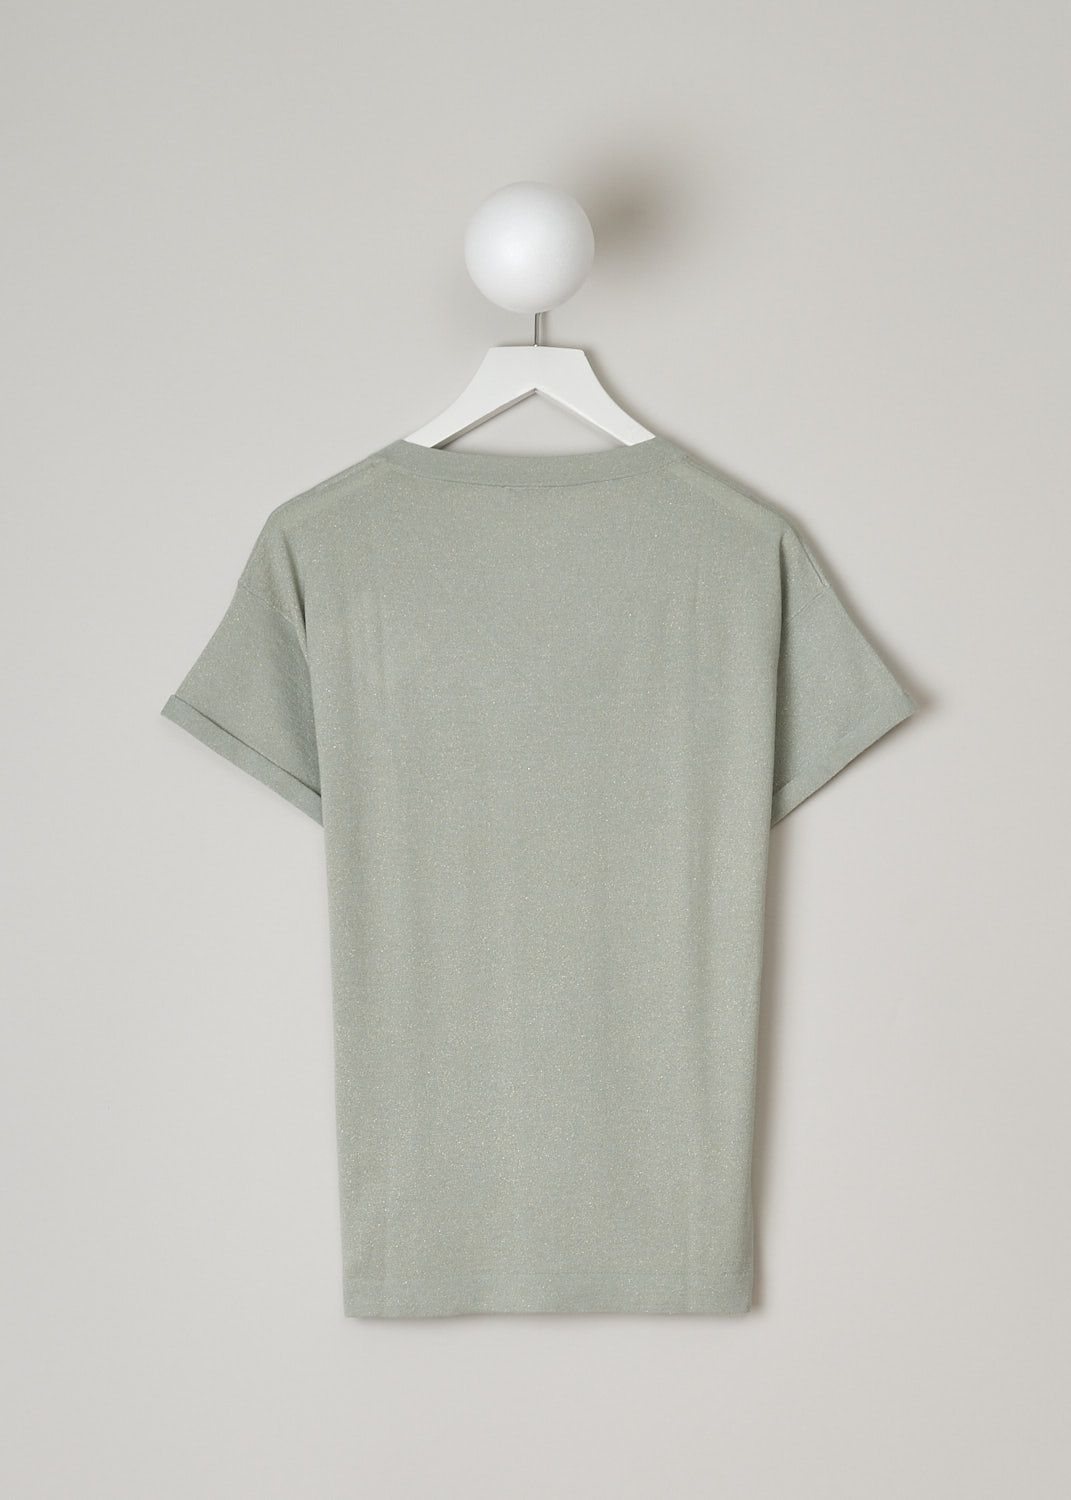 BRUNELLO CUCINELLI, PALE GREEN TOP WITH LUREX THREADING, M41810002_C2847, Green, Back, This pale green top has shimmering gold lurex threading throughout. The top has a ribbed V-neckline and short sleeves with a rolled up hem.  
